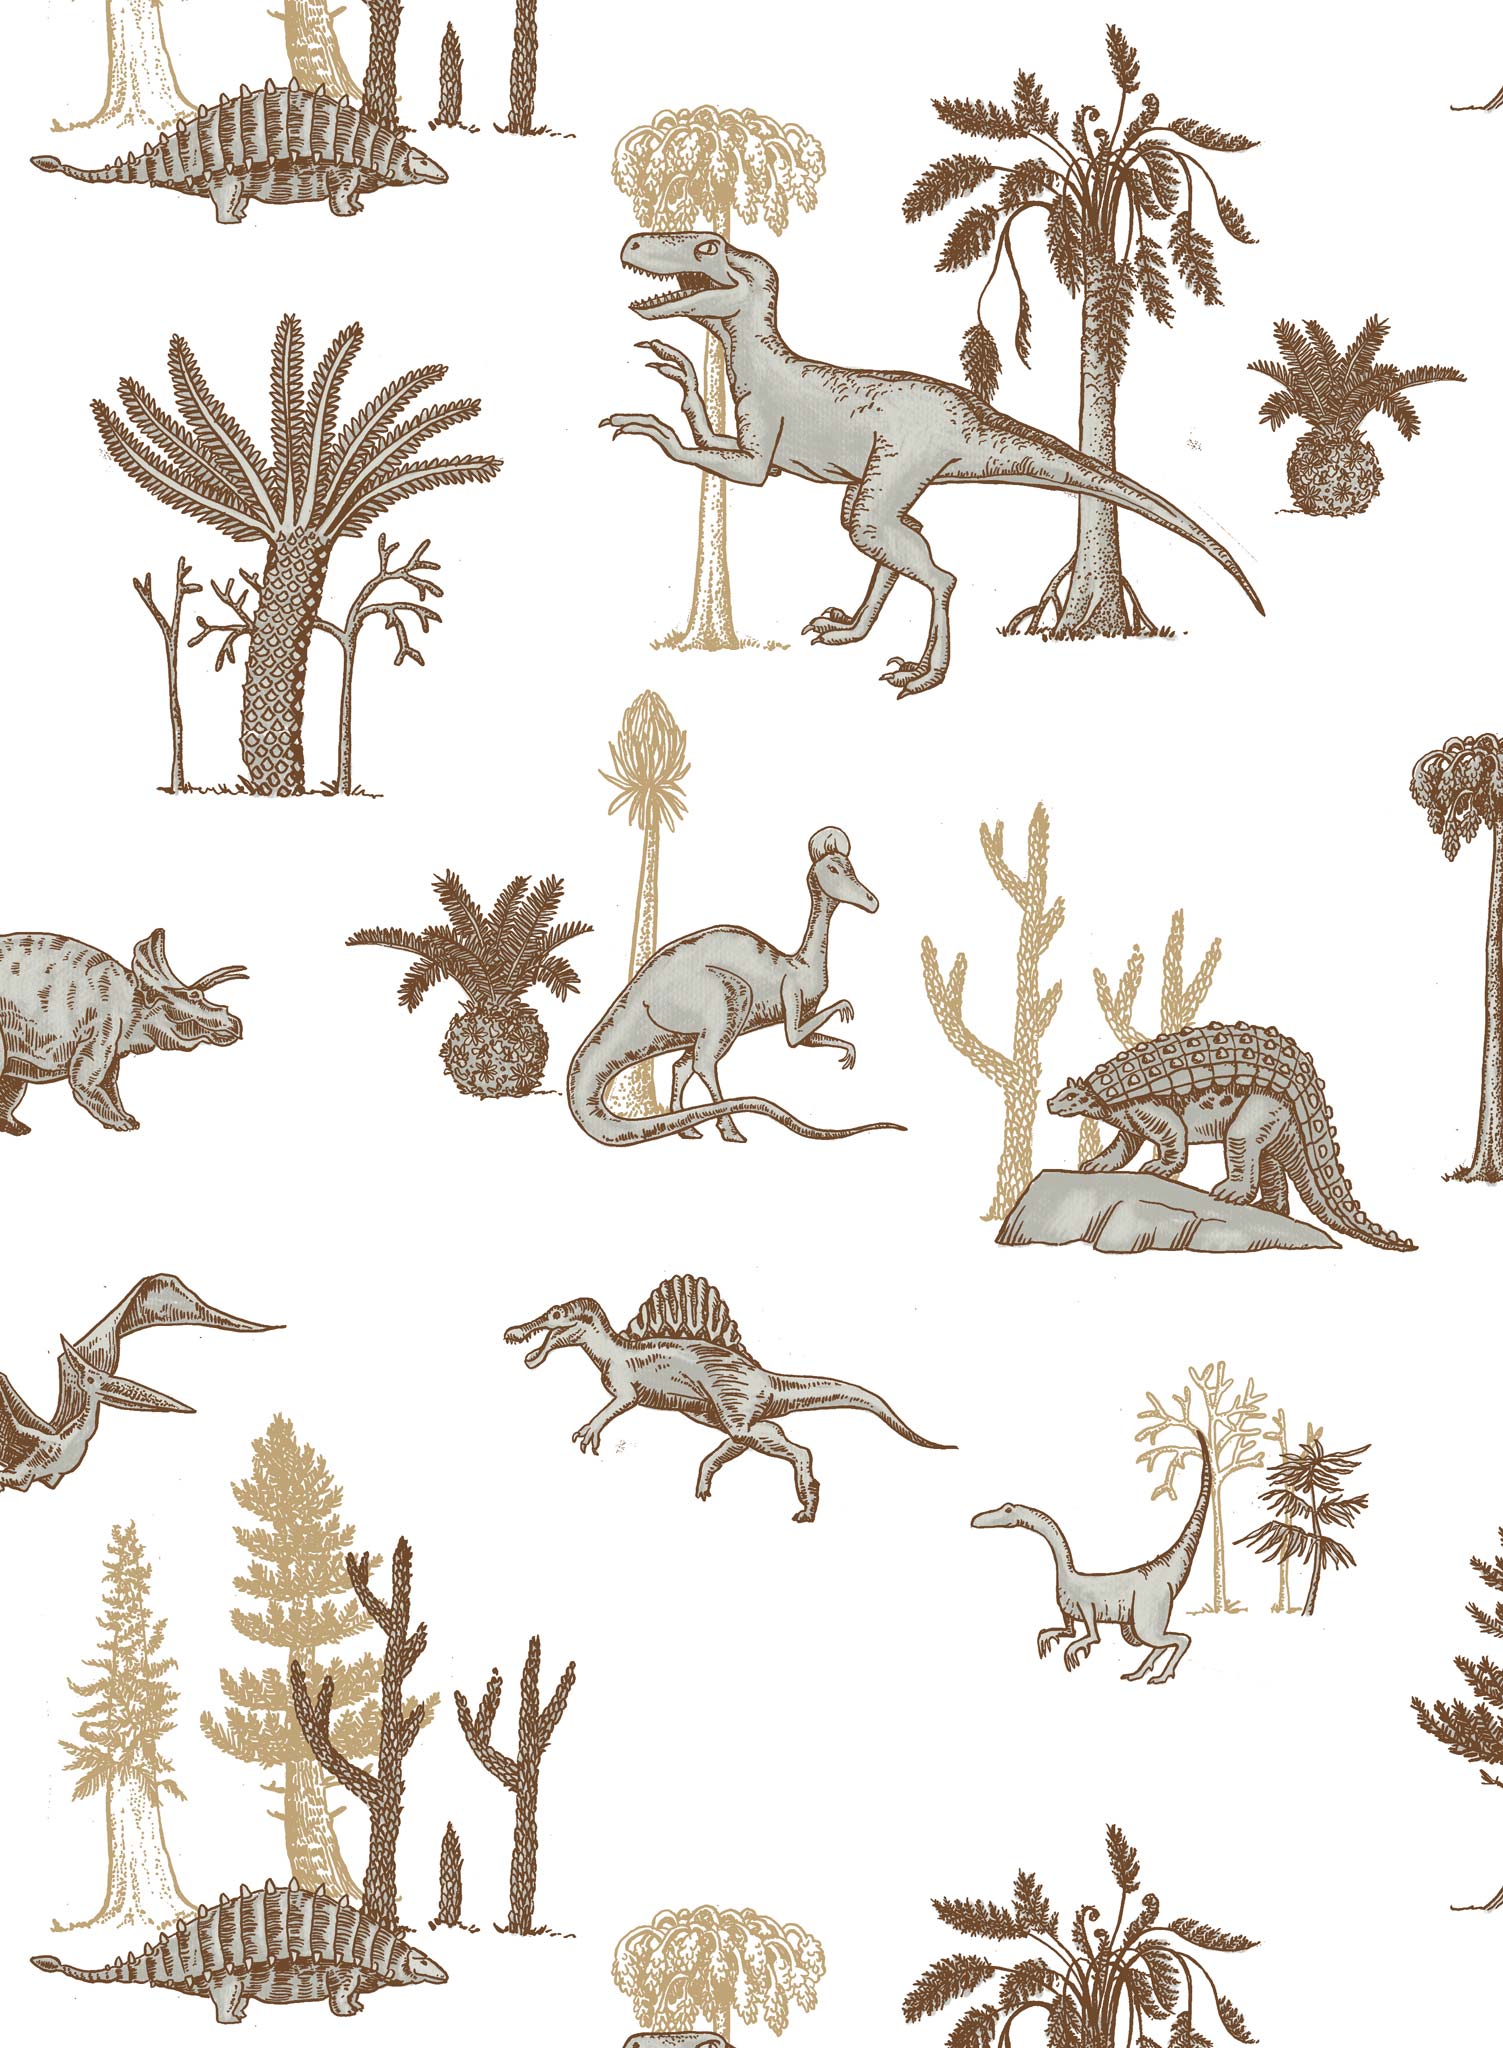 Jurassic is a Minimalist wallpaper by Opposite Wall of their favorite jurassic dinosaurs.